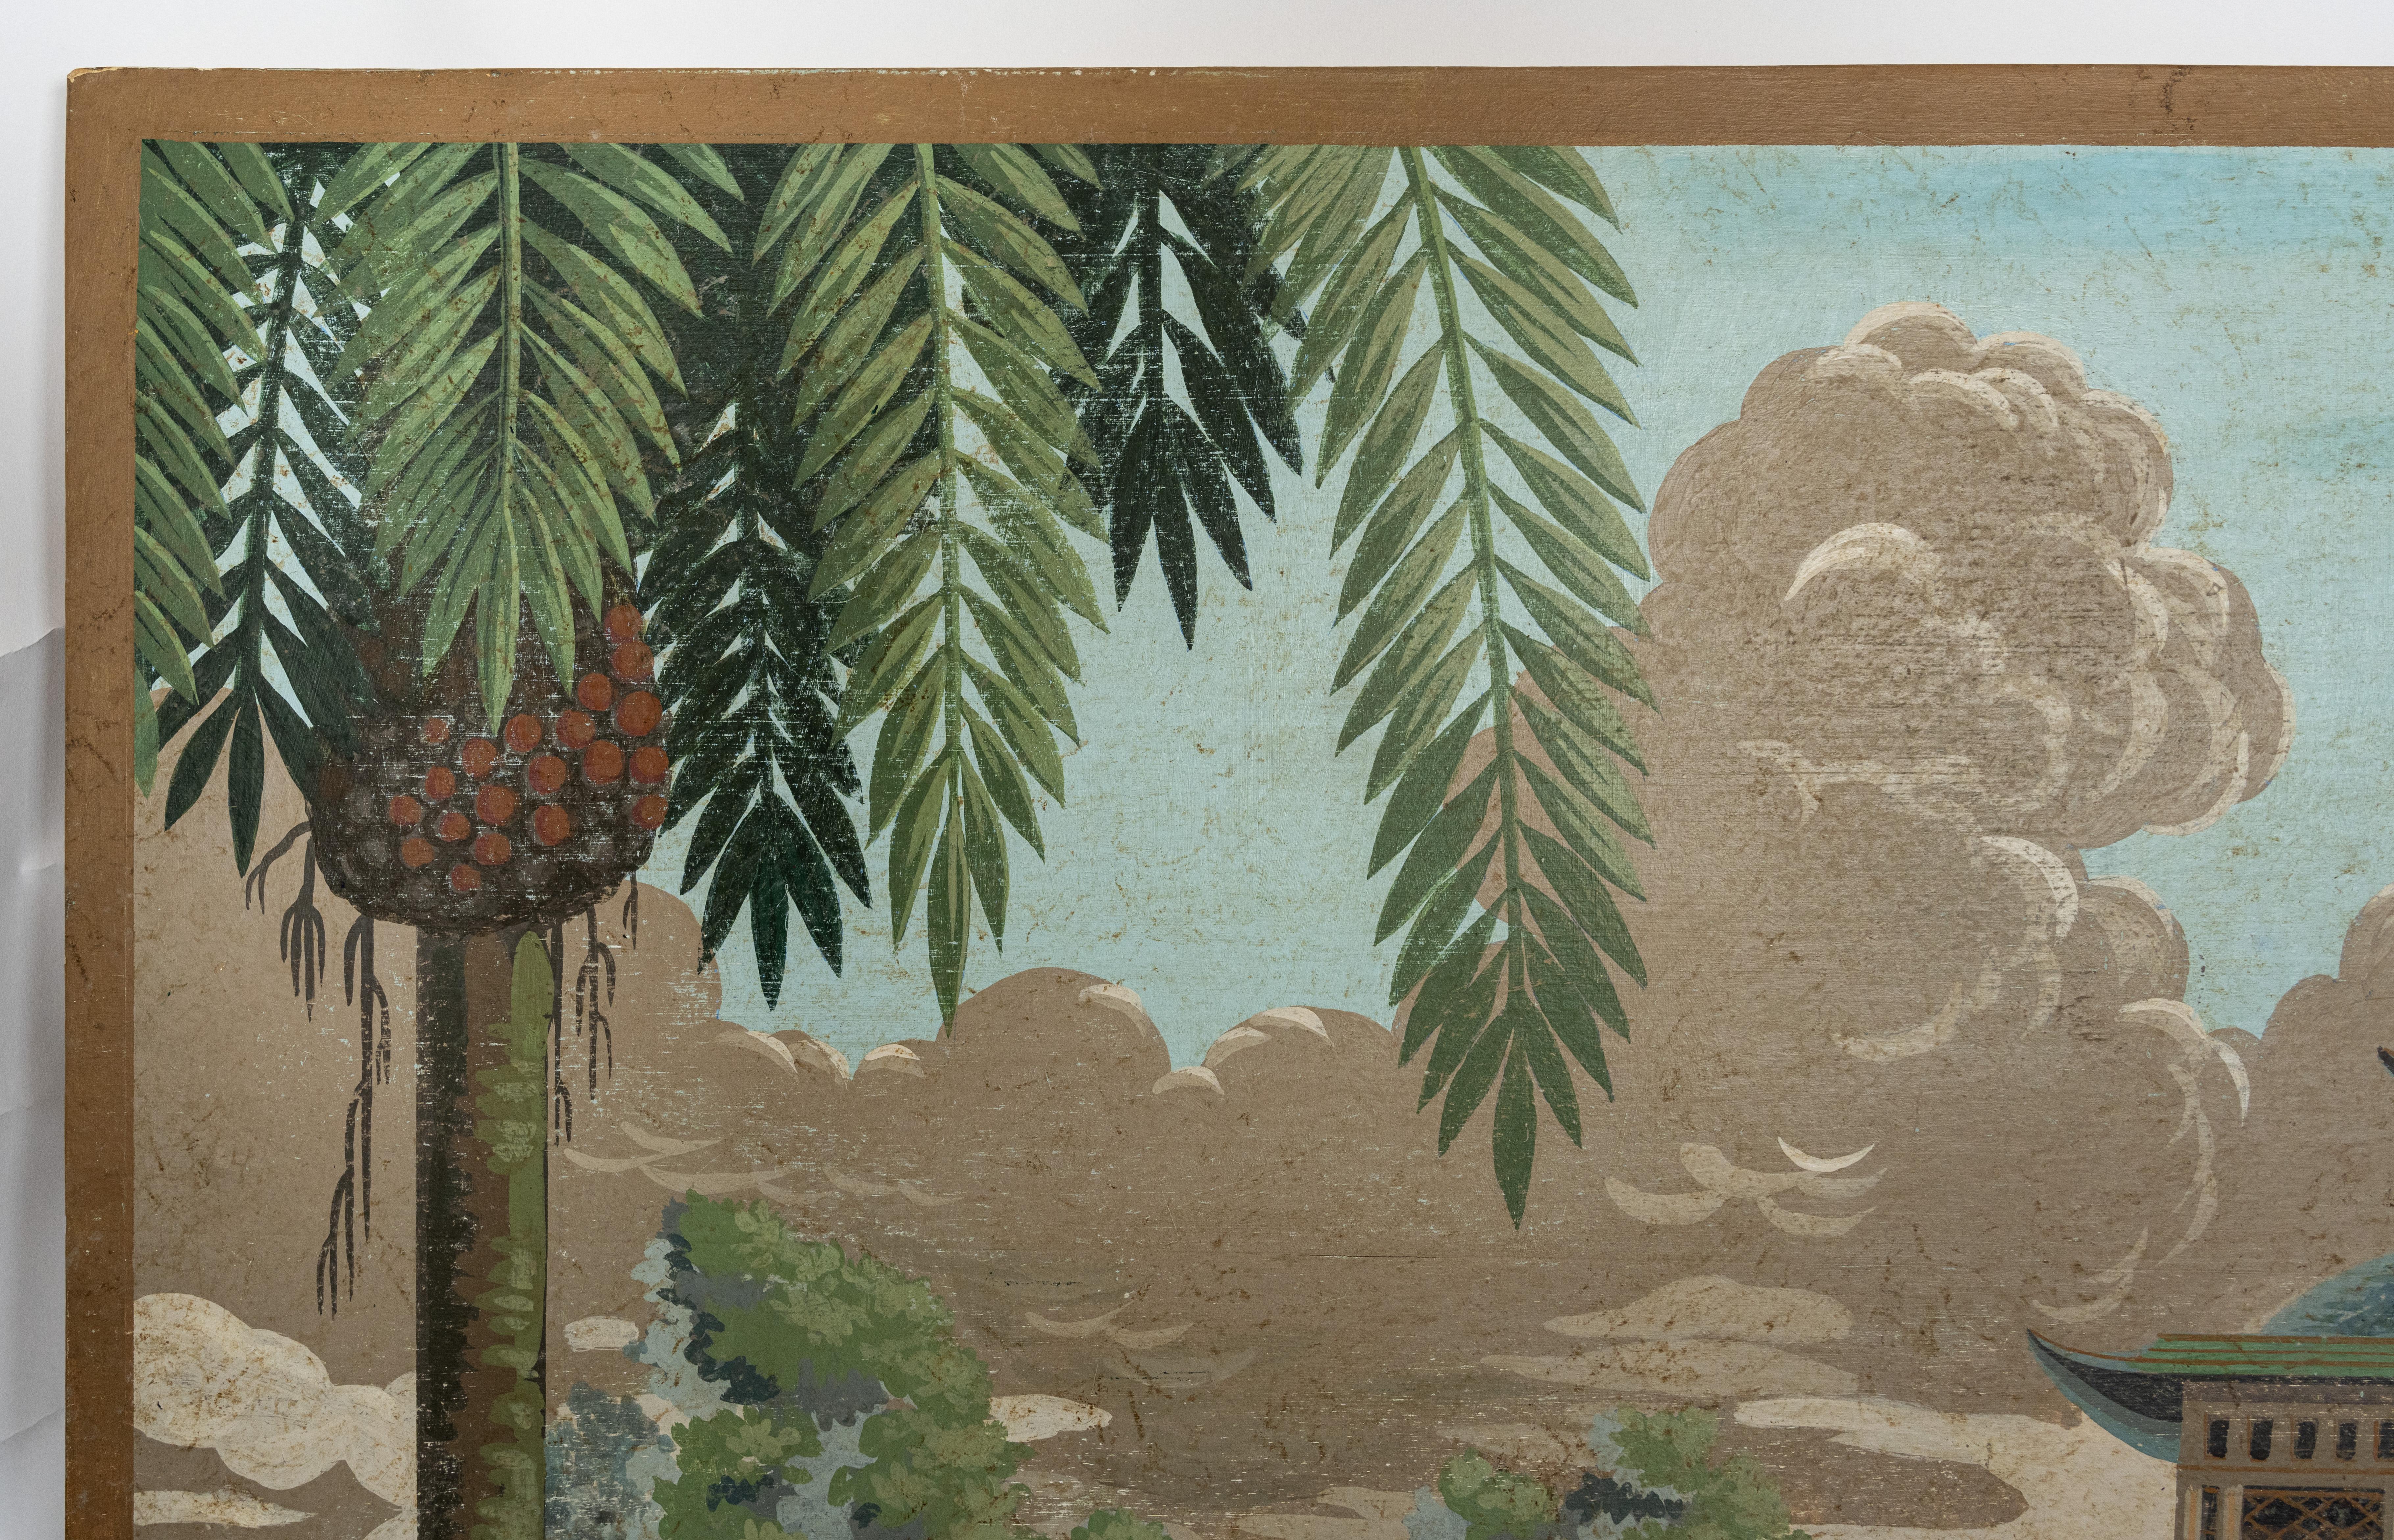 A hand painted Chinoiserie design in oil on rice paper, mounted on board. Depicting village figures in a scene with buildings, mountains, and greenery. The design is based on an example found on the walls of the Hotel de Plouer in Saint Malo,